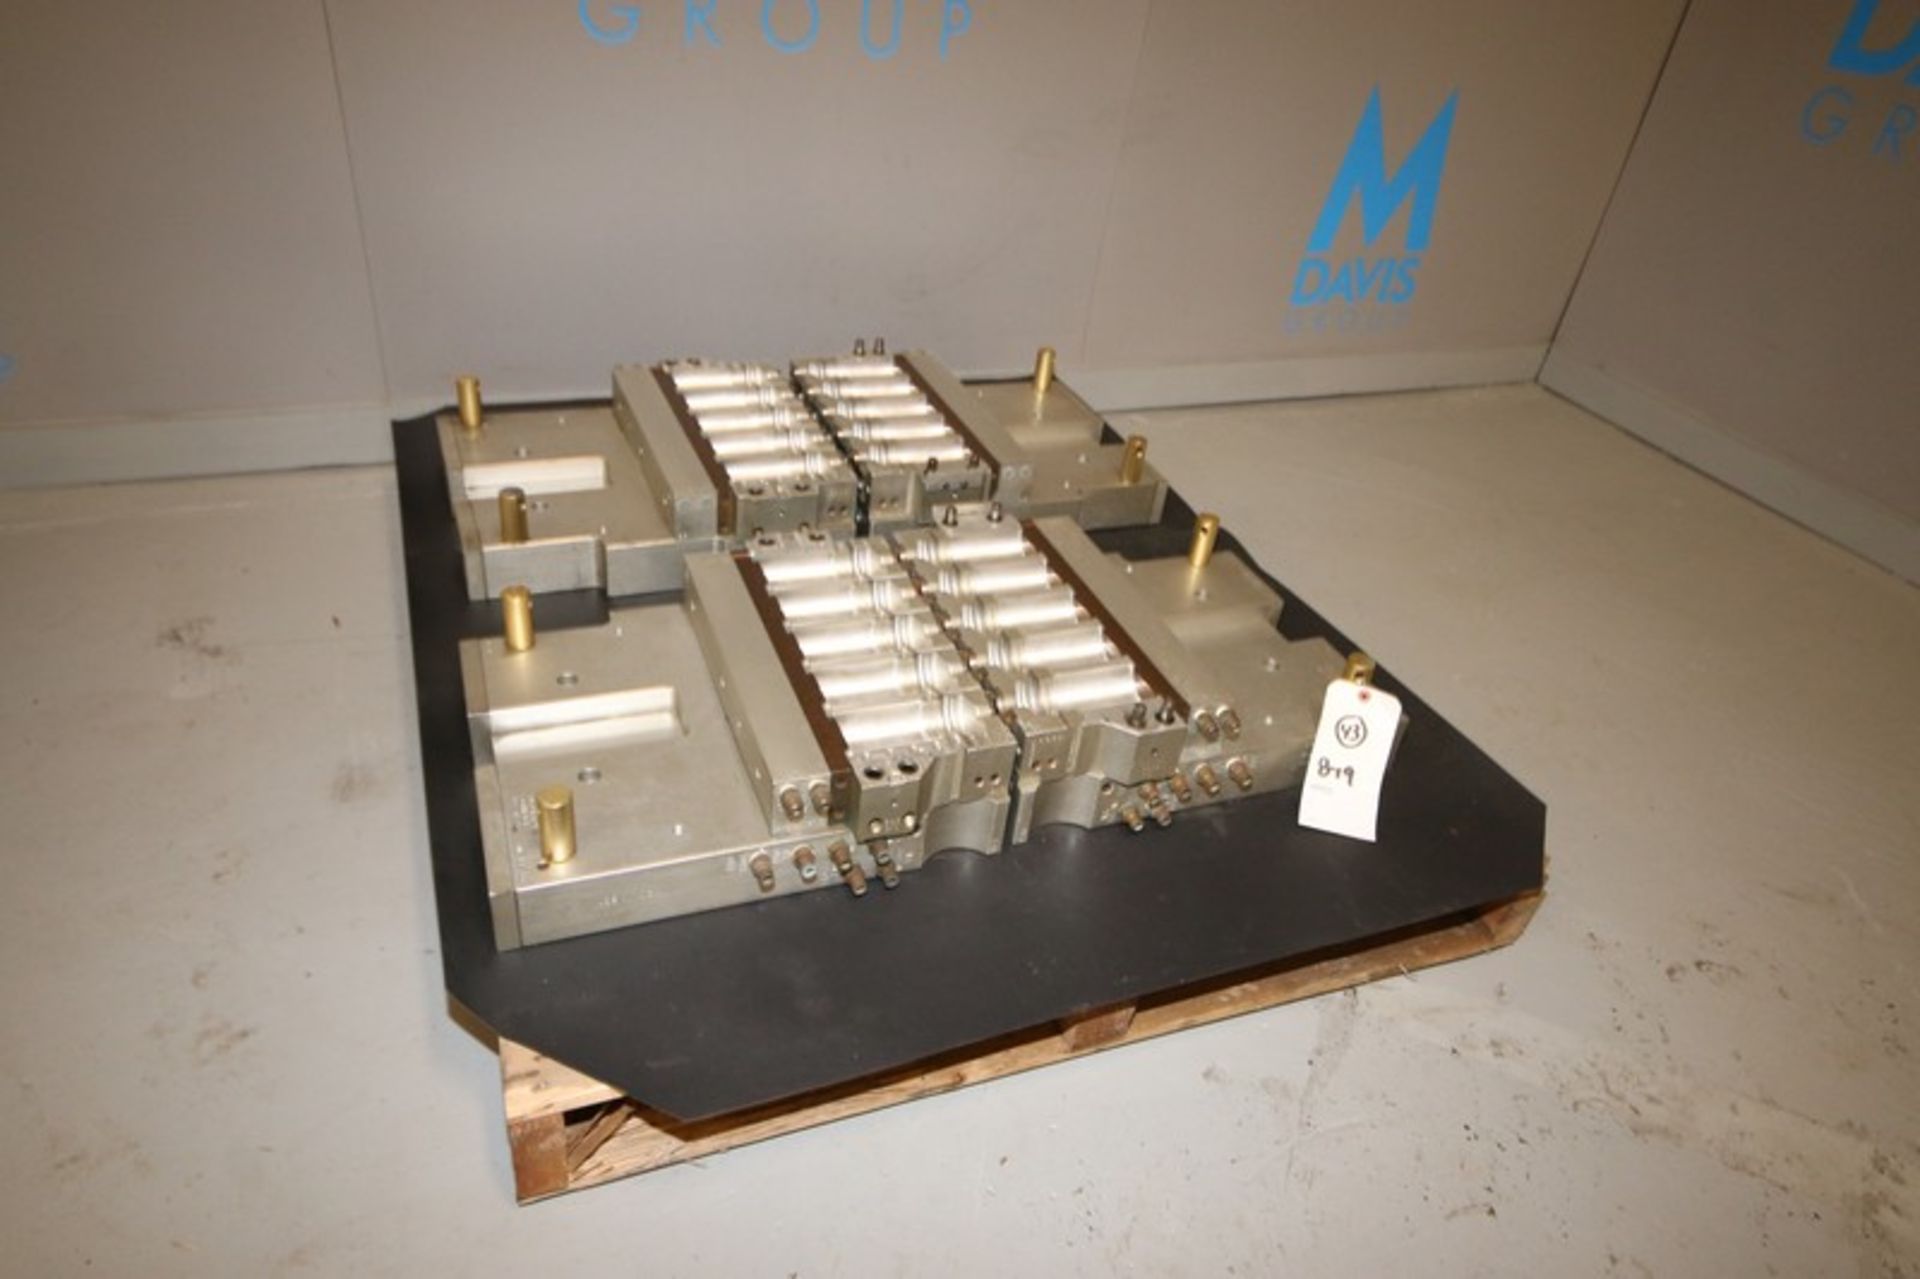 Compact 5-Wide S/S Bottle Molds, S/N 905.851.7724/859.371.3250, Overall Dims.: Aprox. 18-1/4" L x